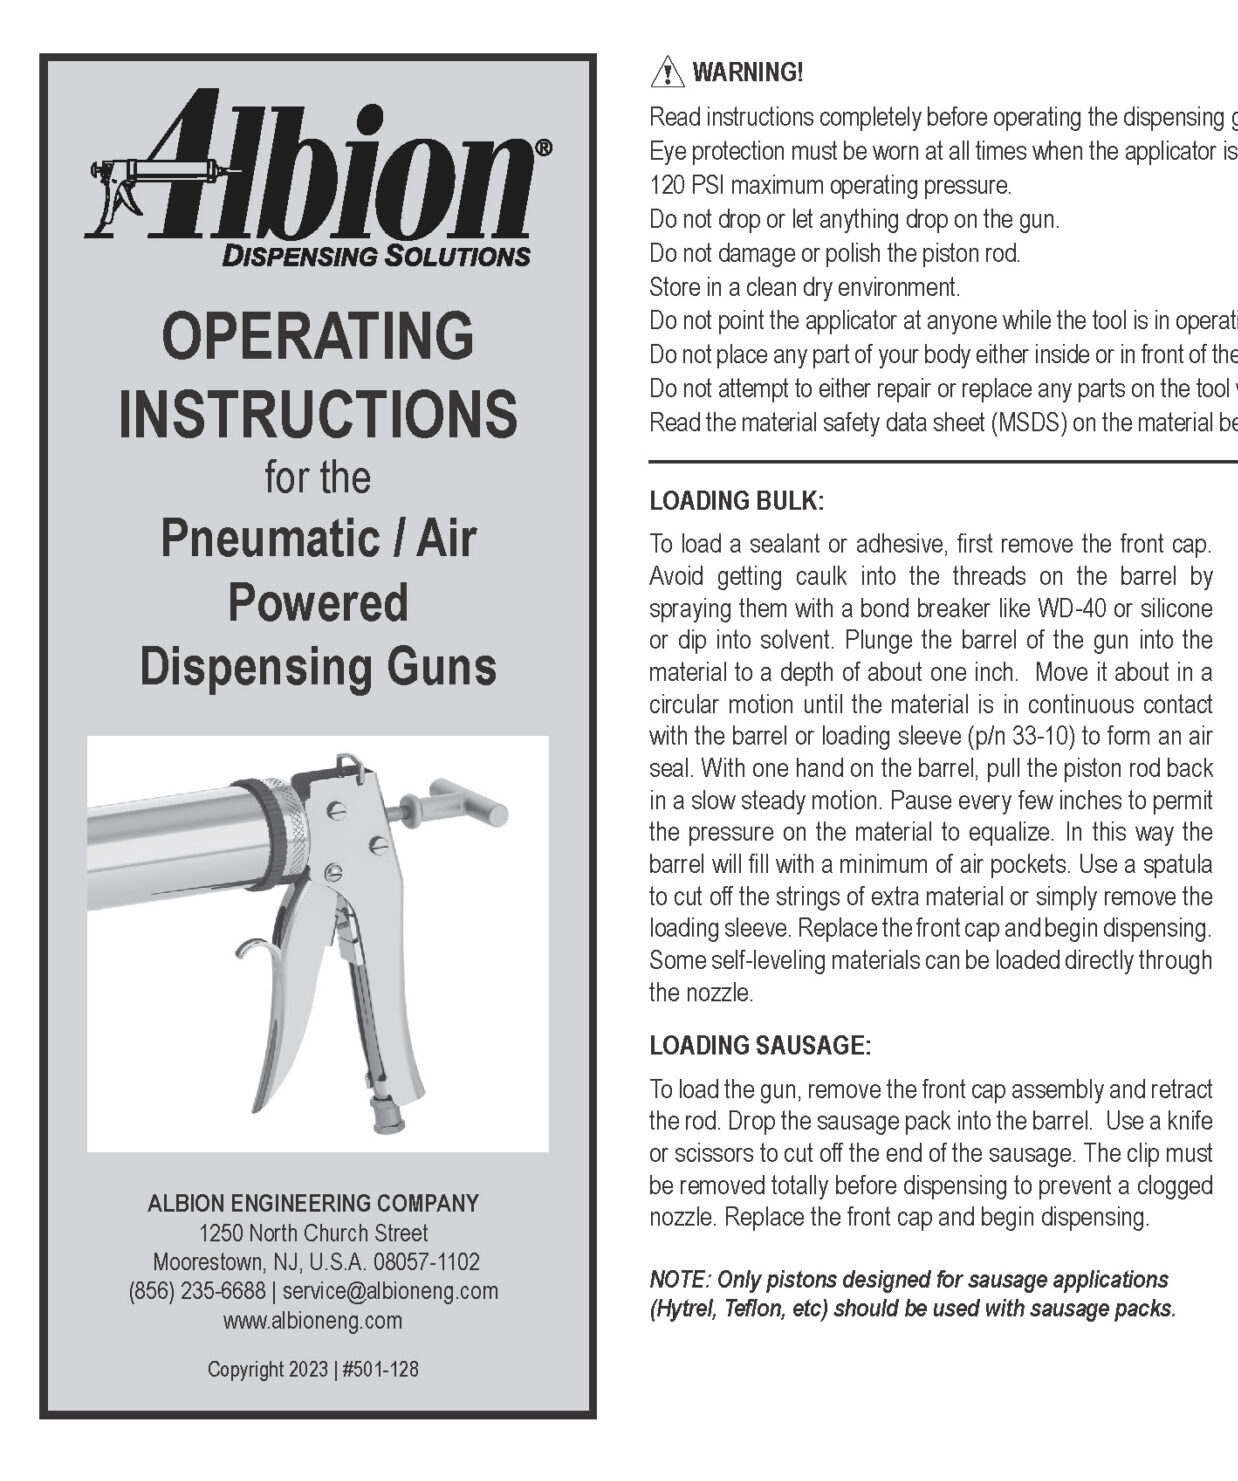 OPERATING INSTRUCTIONS for the Pneumatic / Air Powered Dispensing Guns